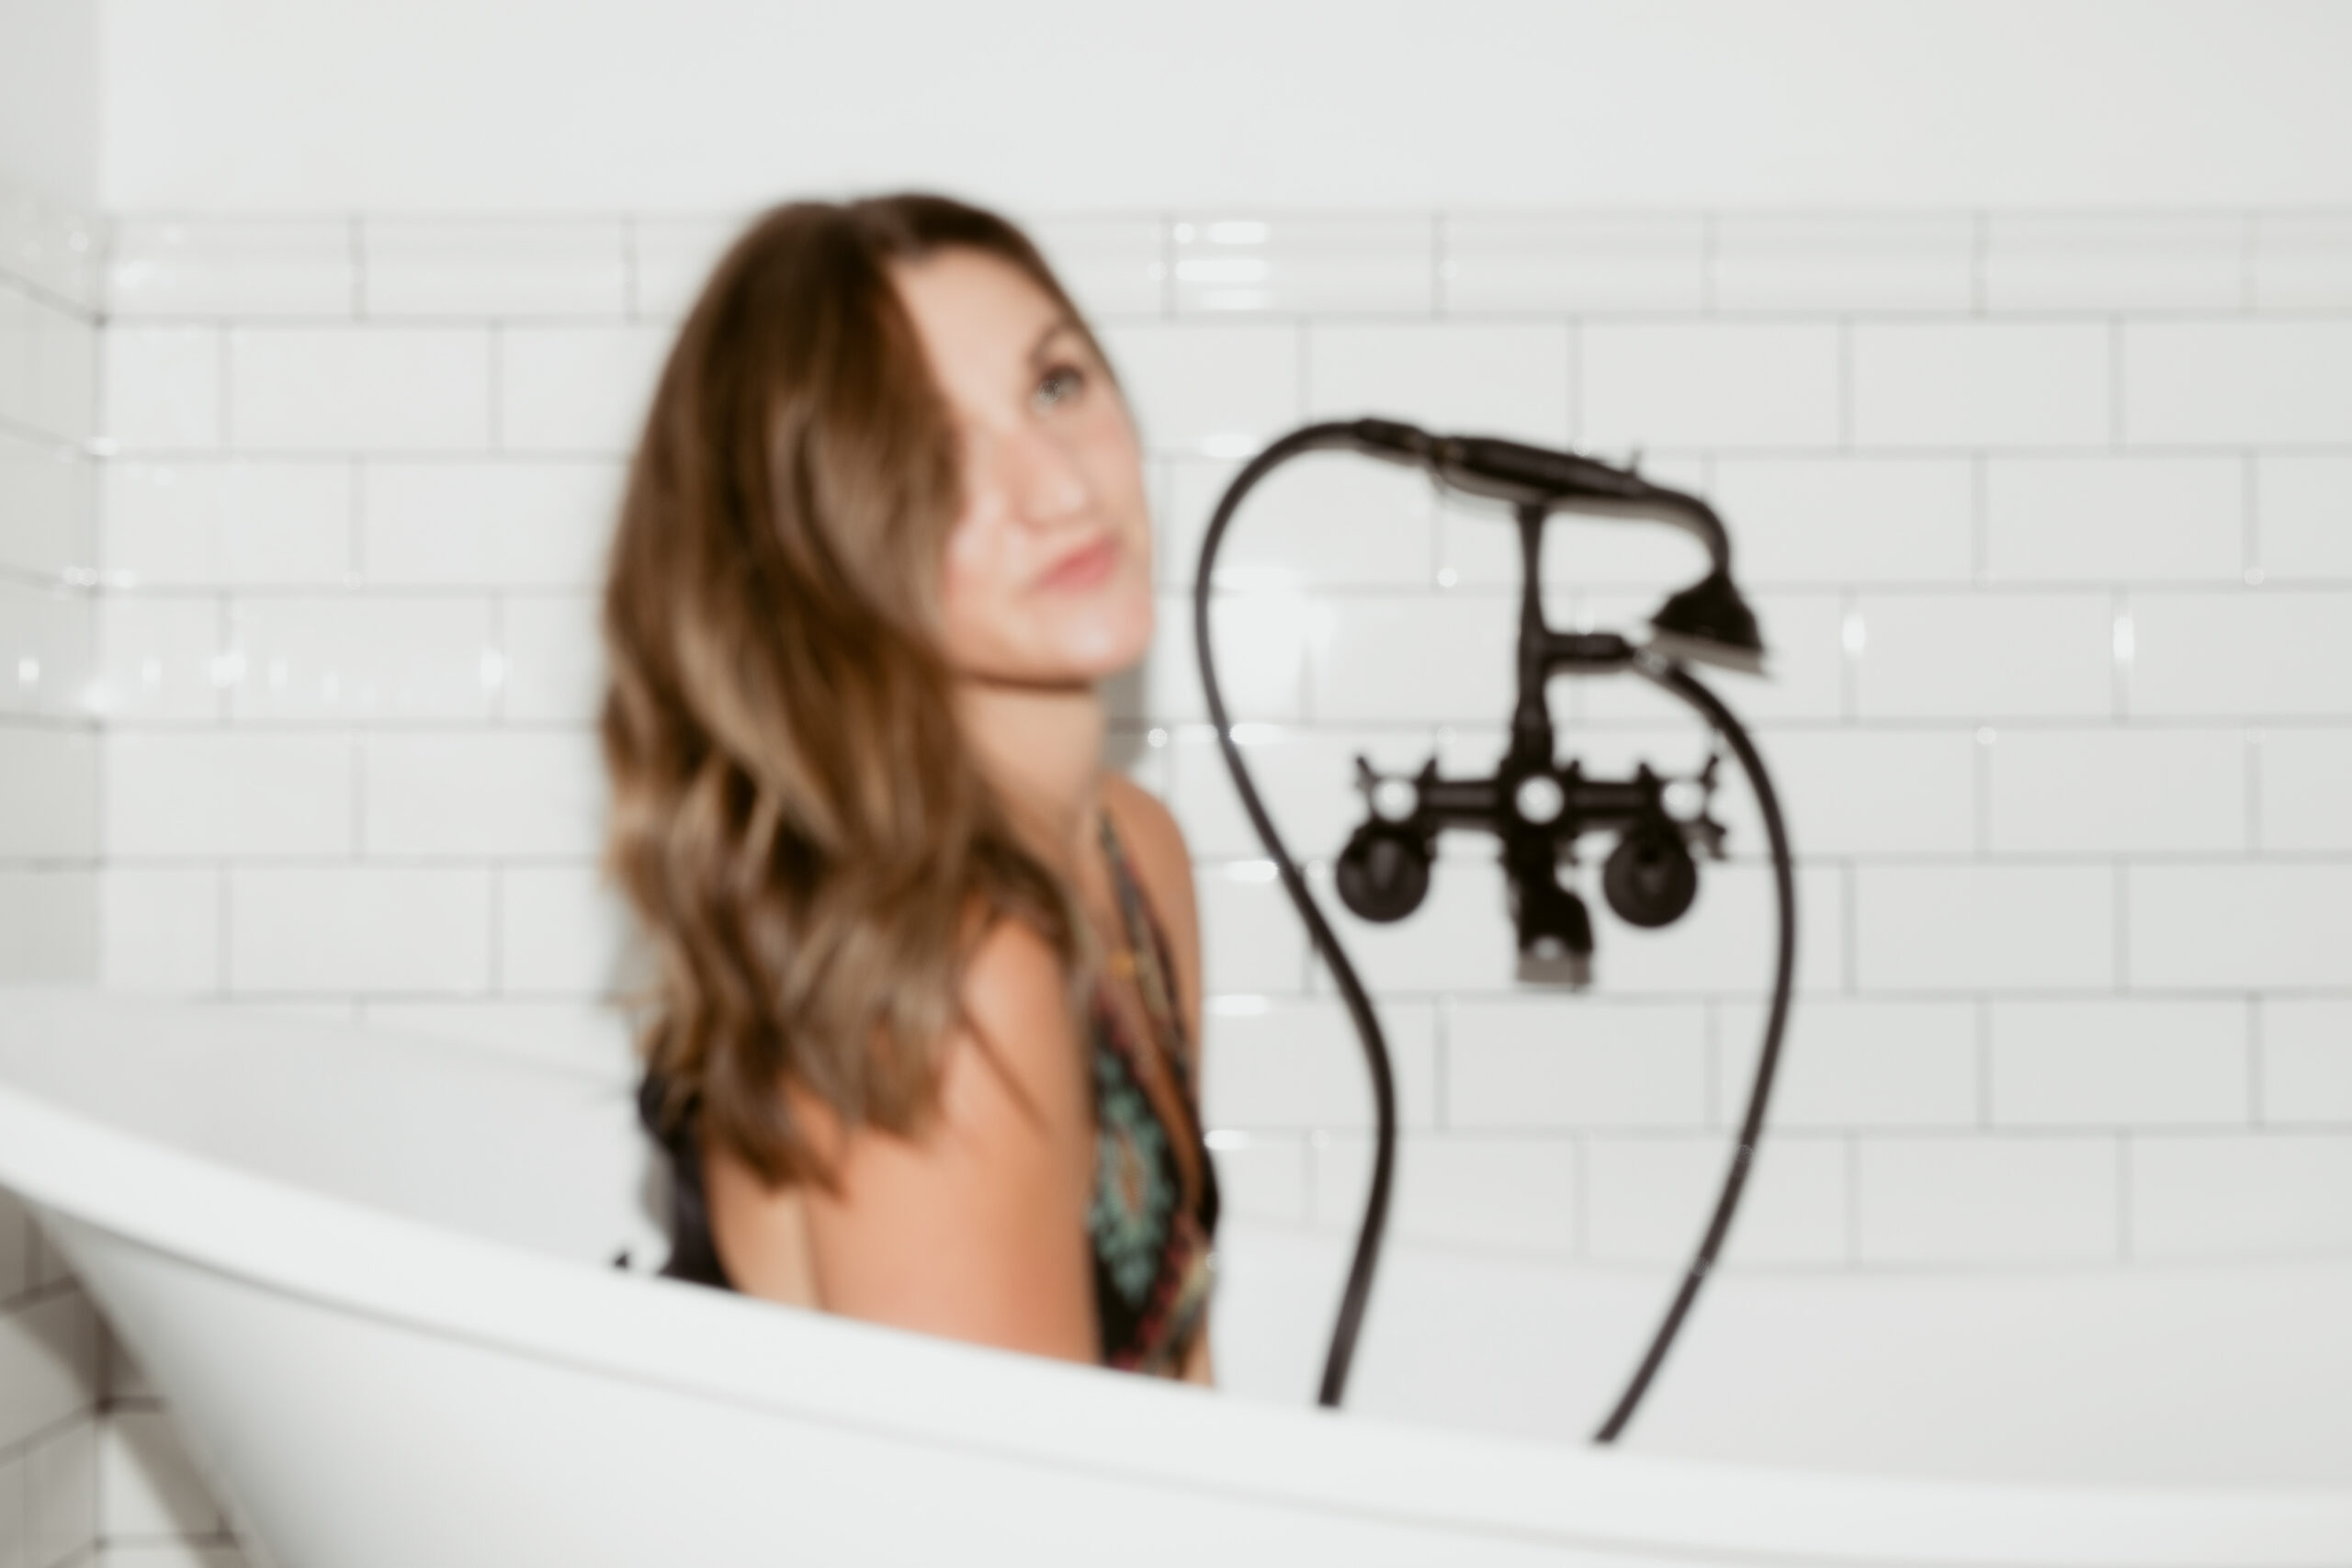 A blogging copywriter poses in the bathtub during a brand photo shoot.